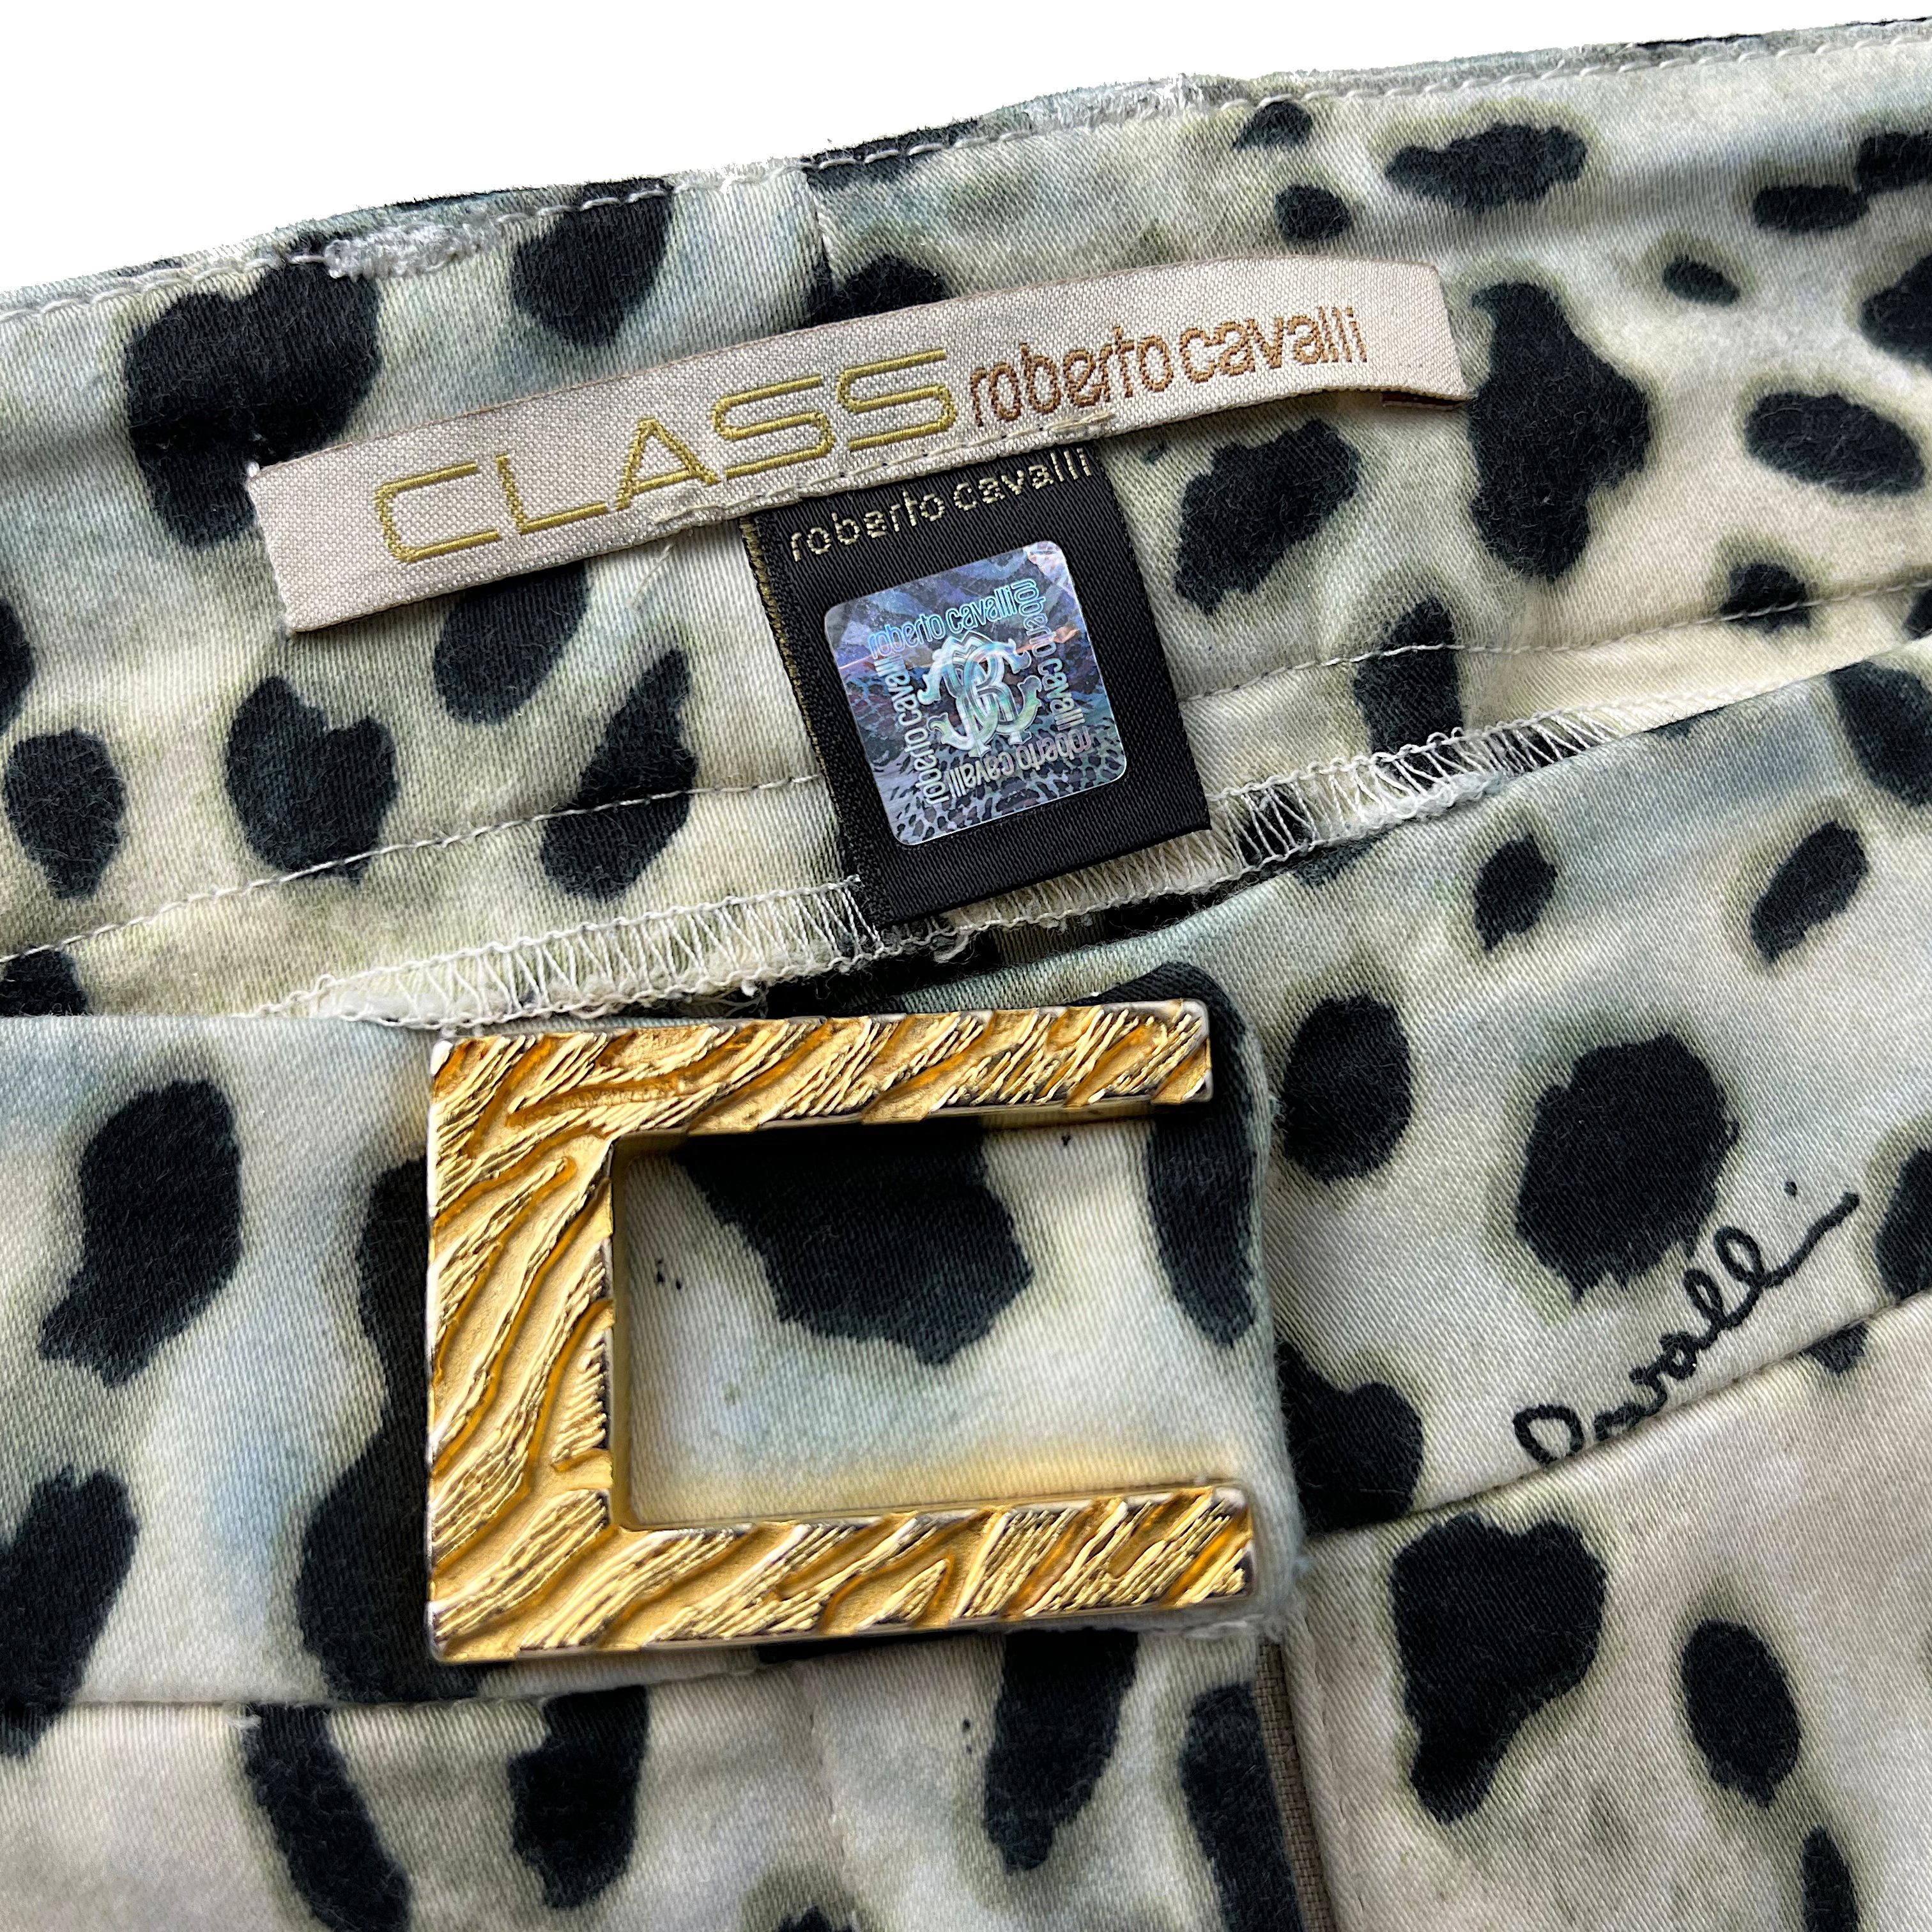 CLASS CAVALLI – 2011 Pants with Signed White Leopard Print  Size 8US 38EU 1